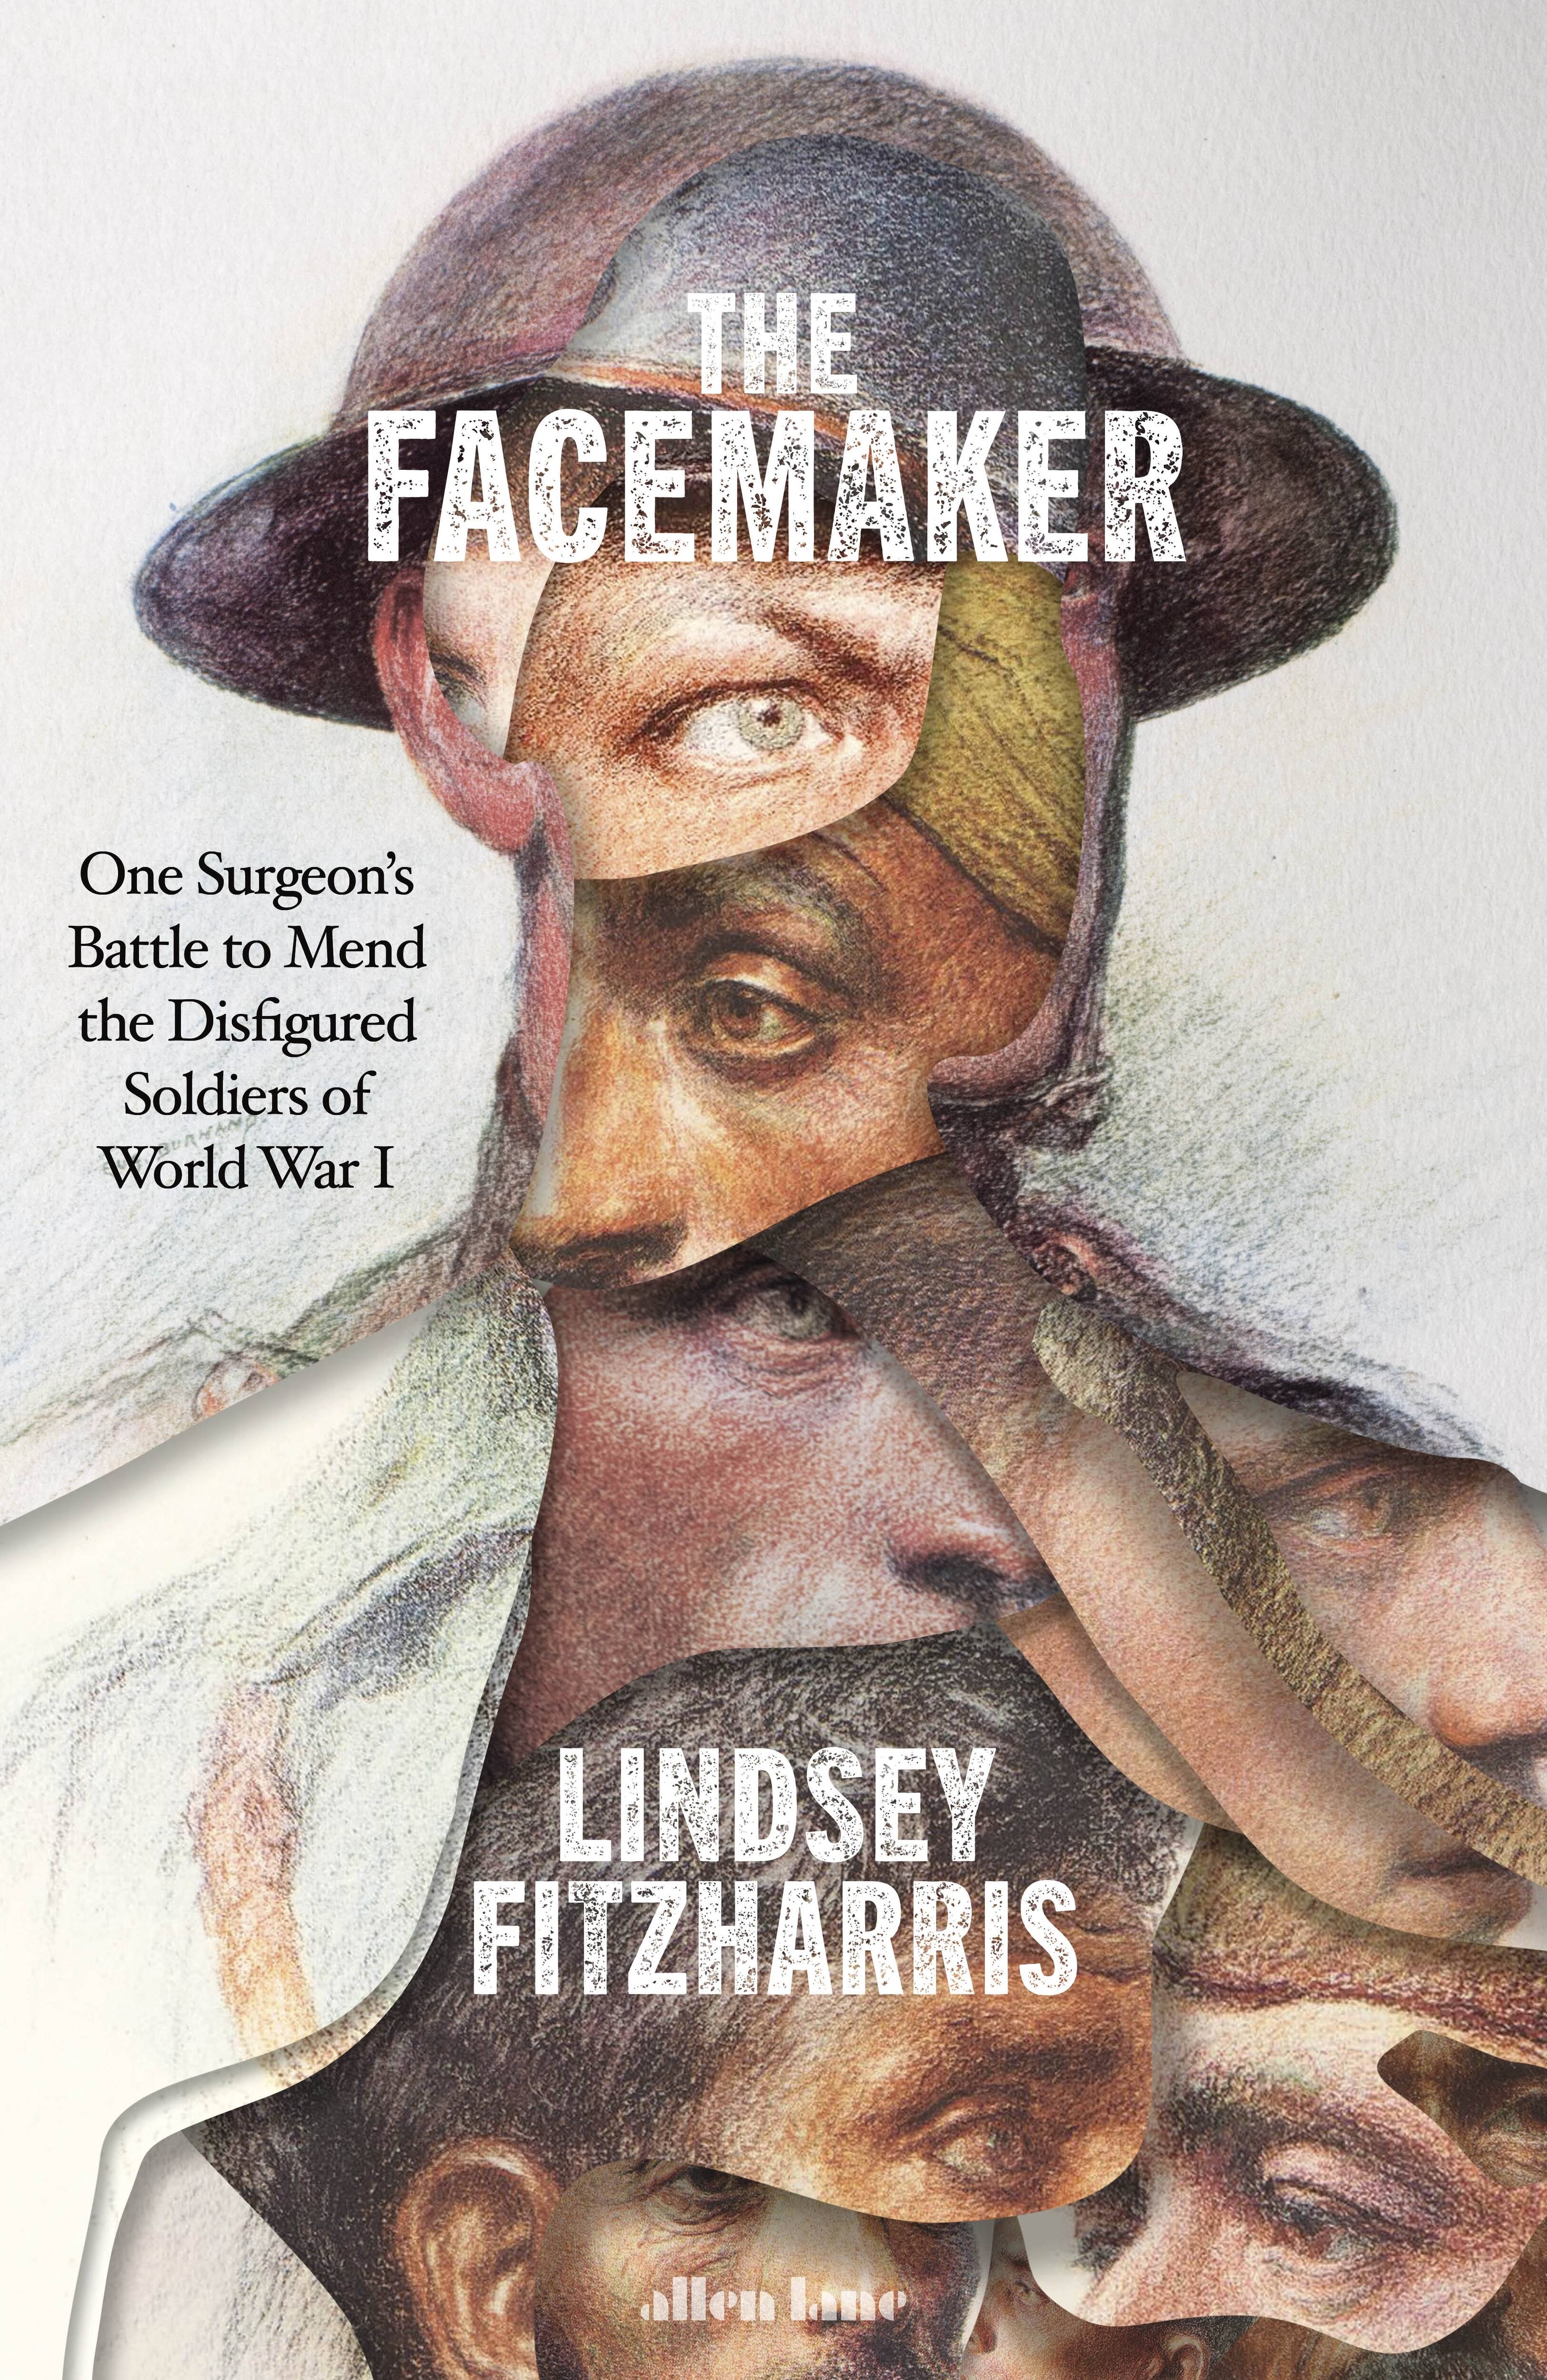 The Facemaker by Lindsey Fitzharris